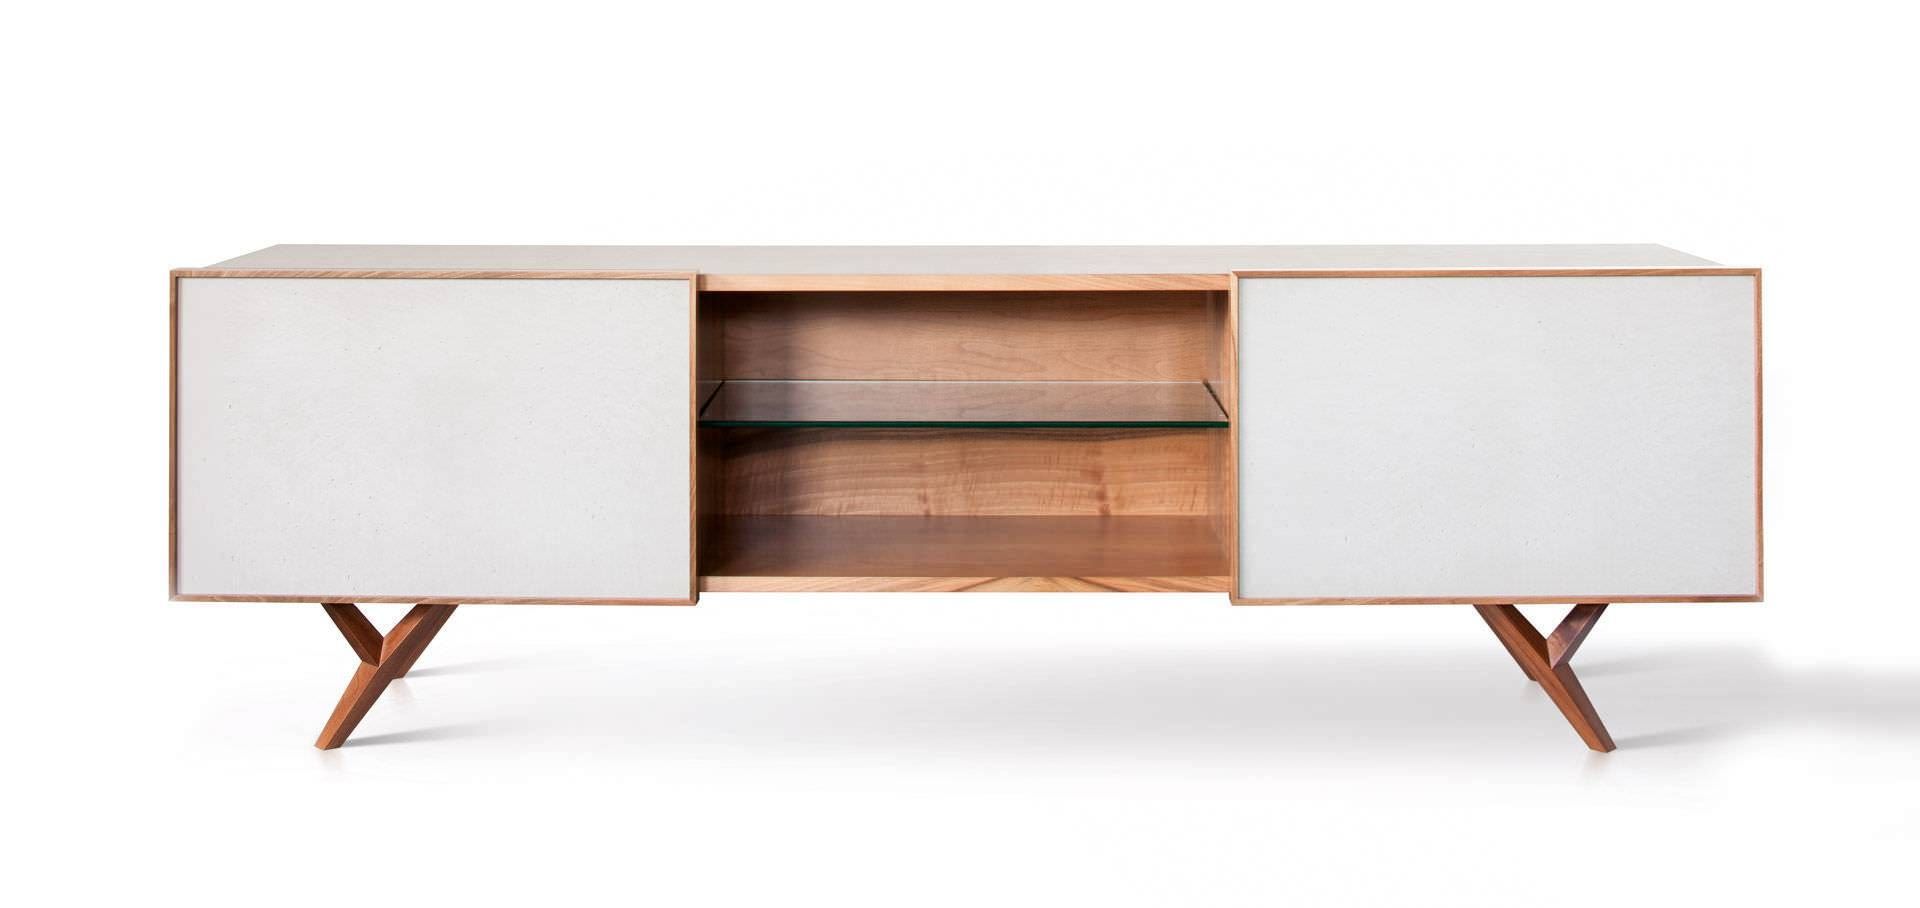 Furniture: Beautiful Profile Modern Sideboard For Living Room Pertaining To White Contemporary Sideboard (View 5 of 20)